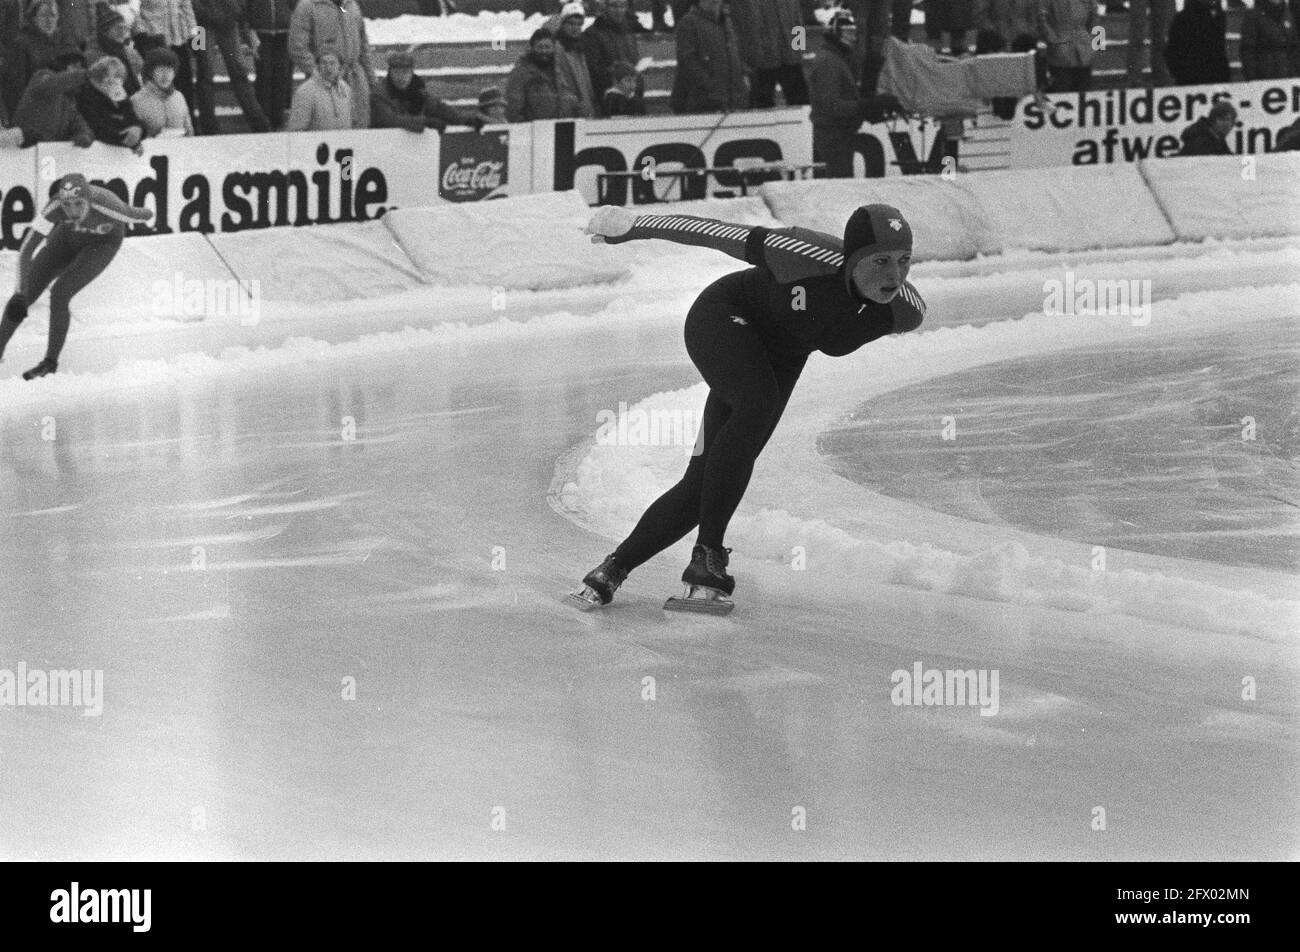 Skating international match between the Netherlands and Norway in Groningen. Ria Visser in action, December 19, 1981, skating, sports, The Netherlands, 20th century press agency photo, news to remember, documentary, historic photography 1945-1990, visual stories, human history of the Twentieth Century, capturing moments in time Stock Photo